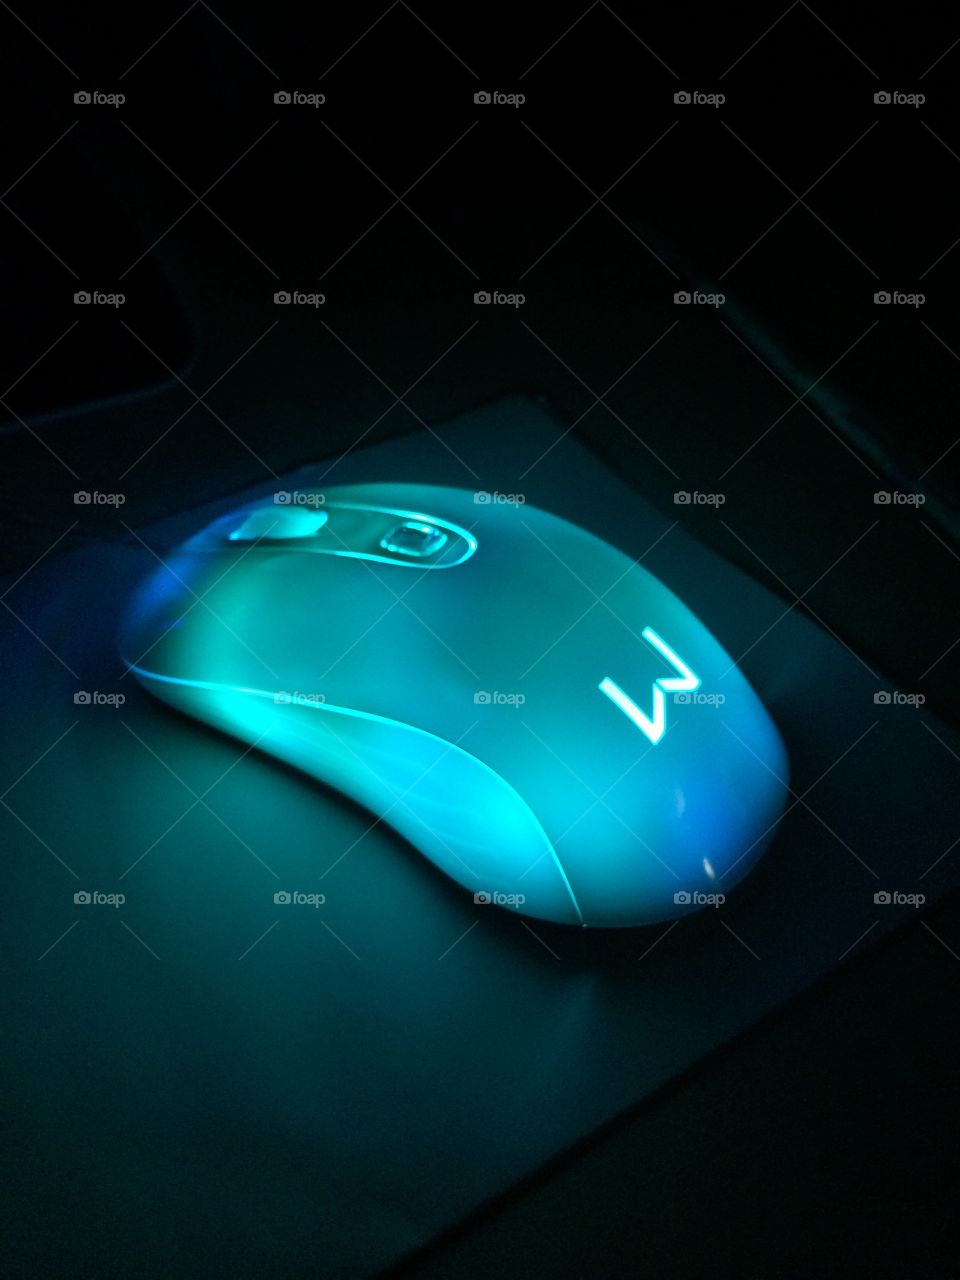 My mouse!!